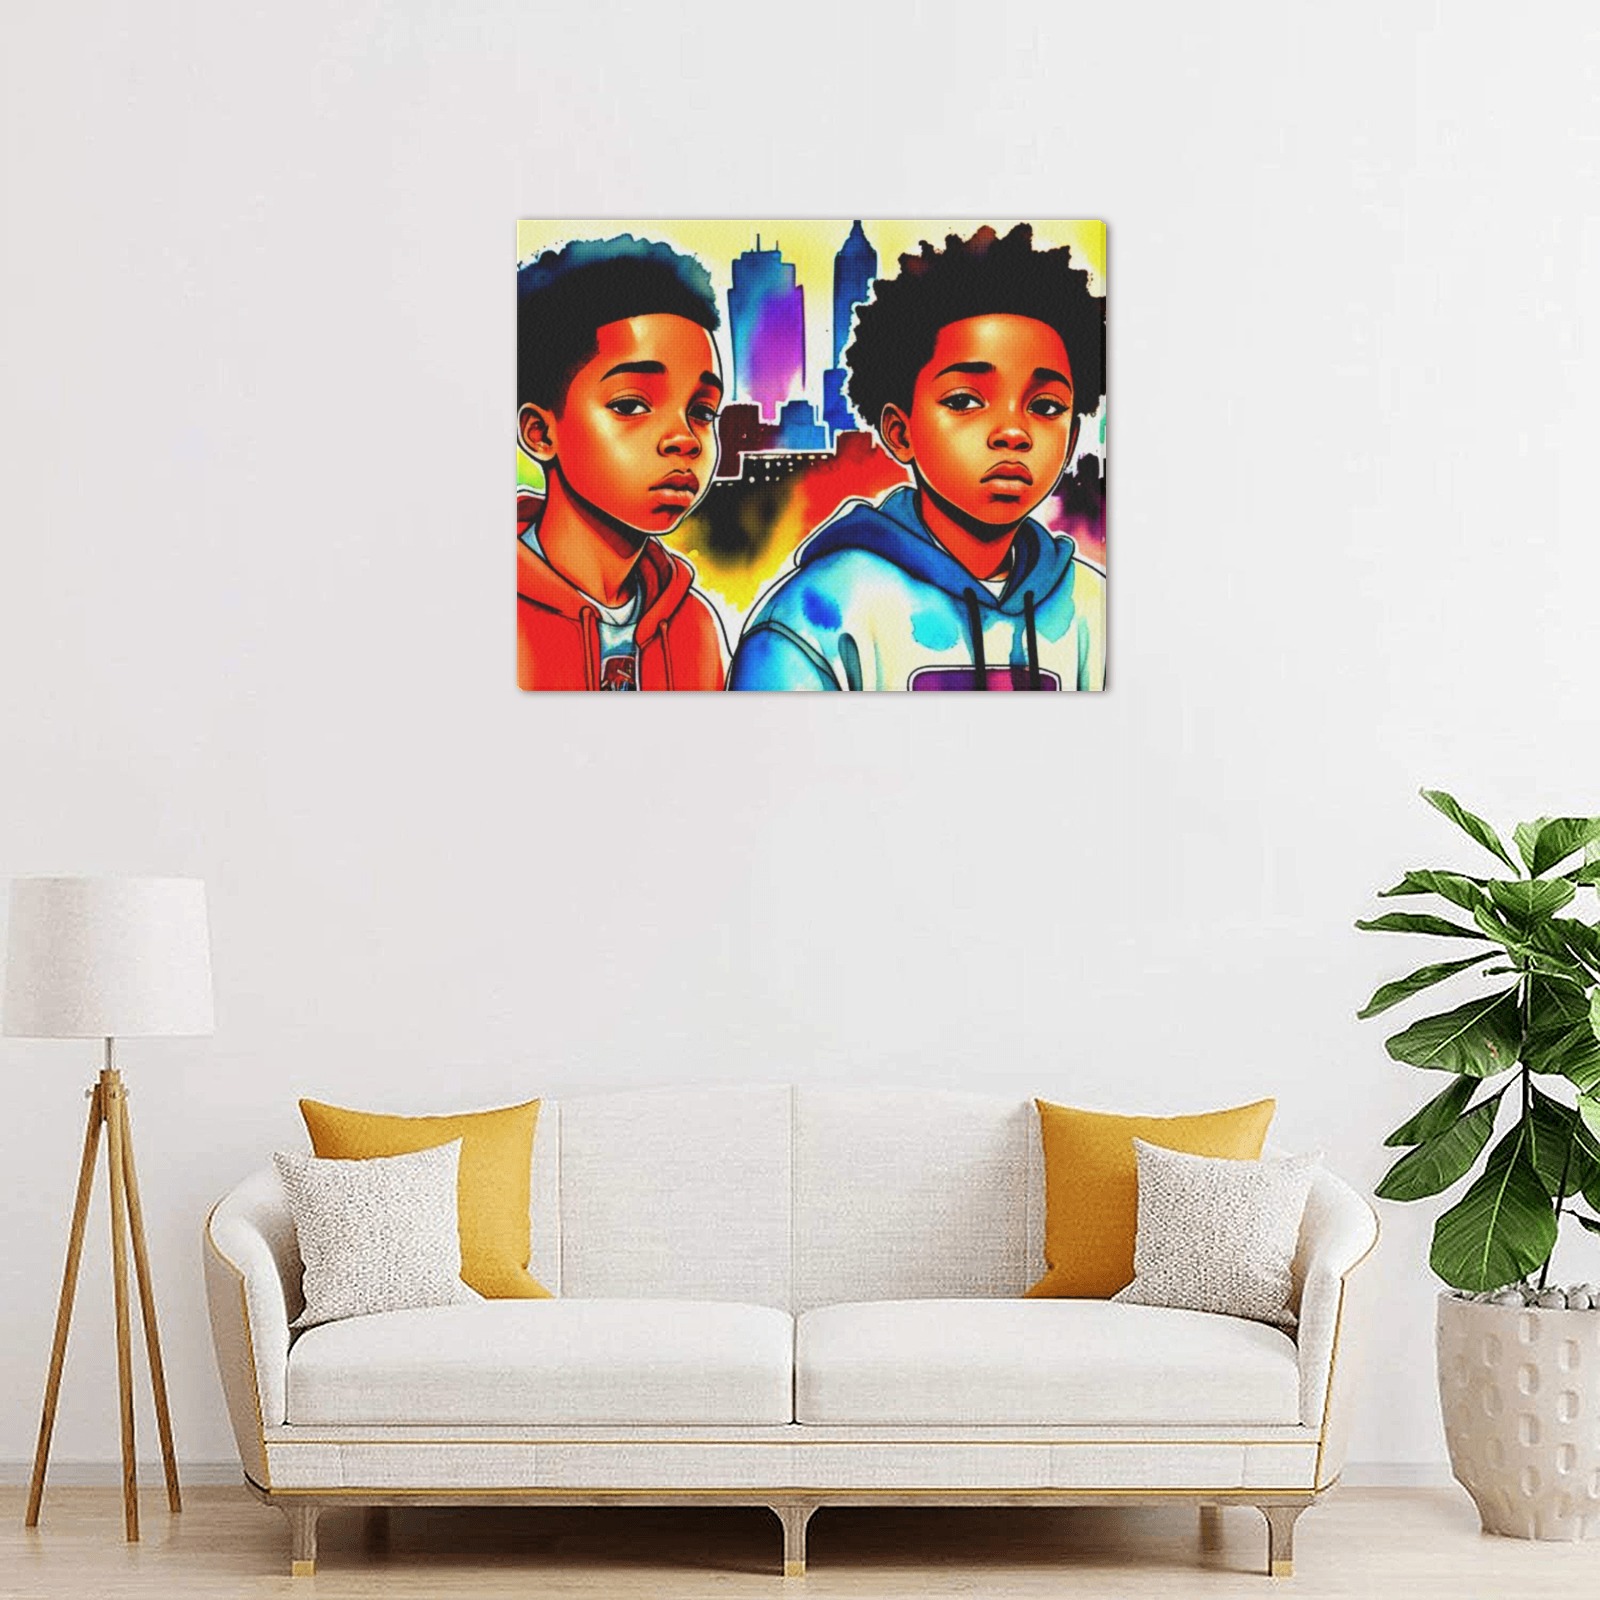 KIDS IN AMERICA 2 Upgraded Canvas Print 20"x16"